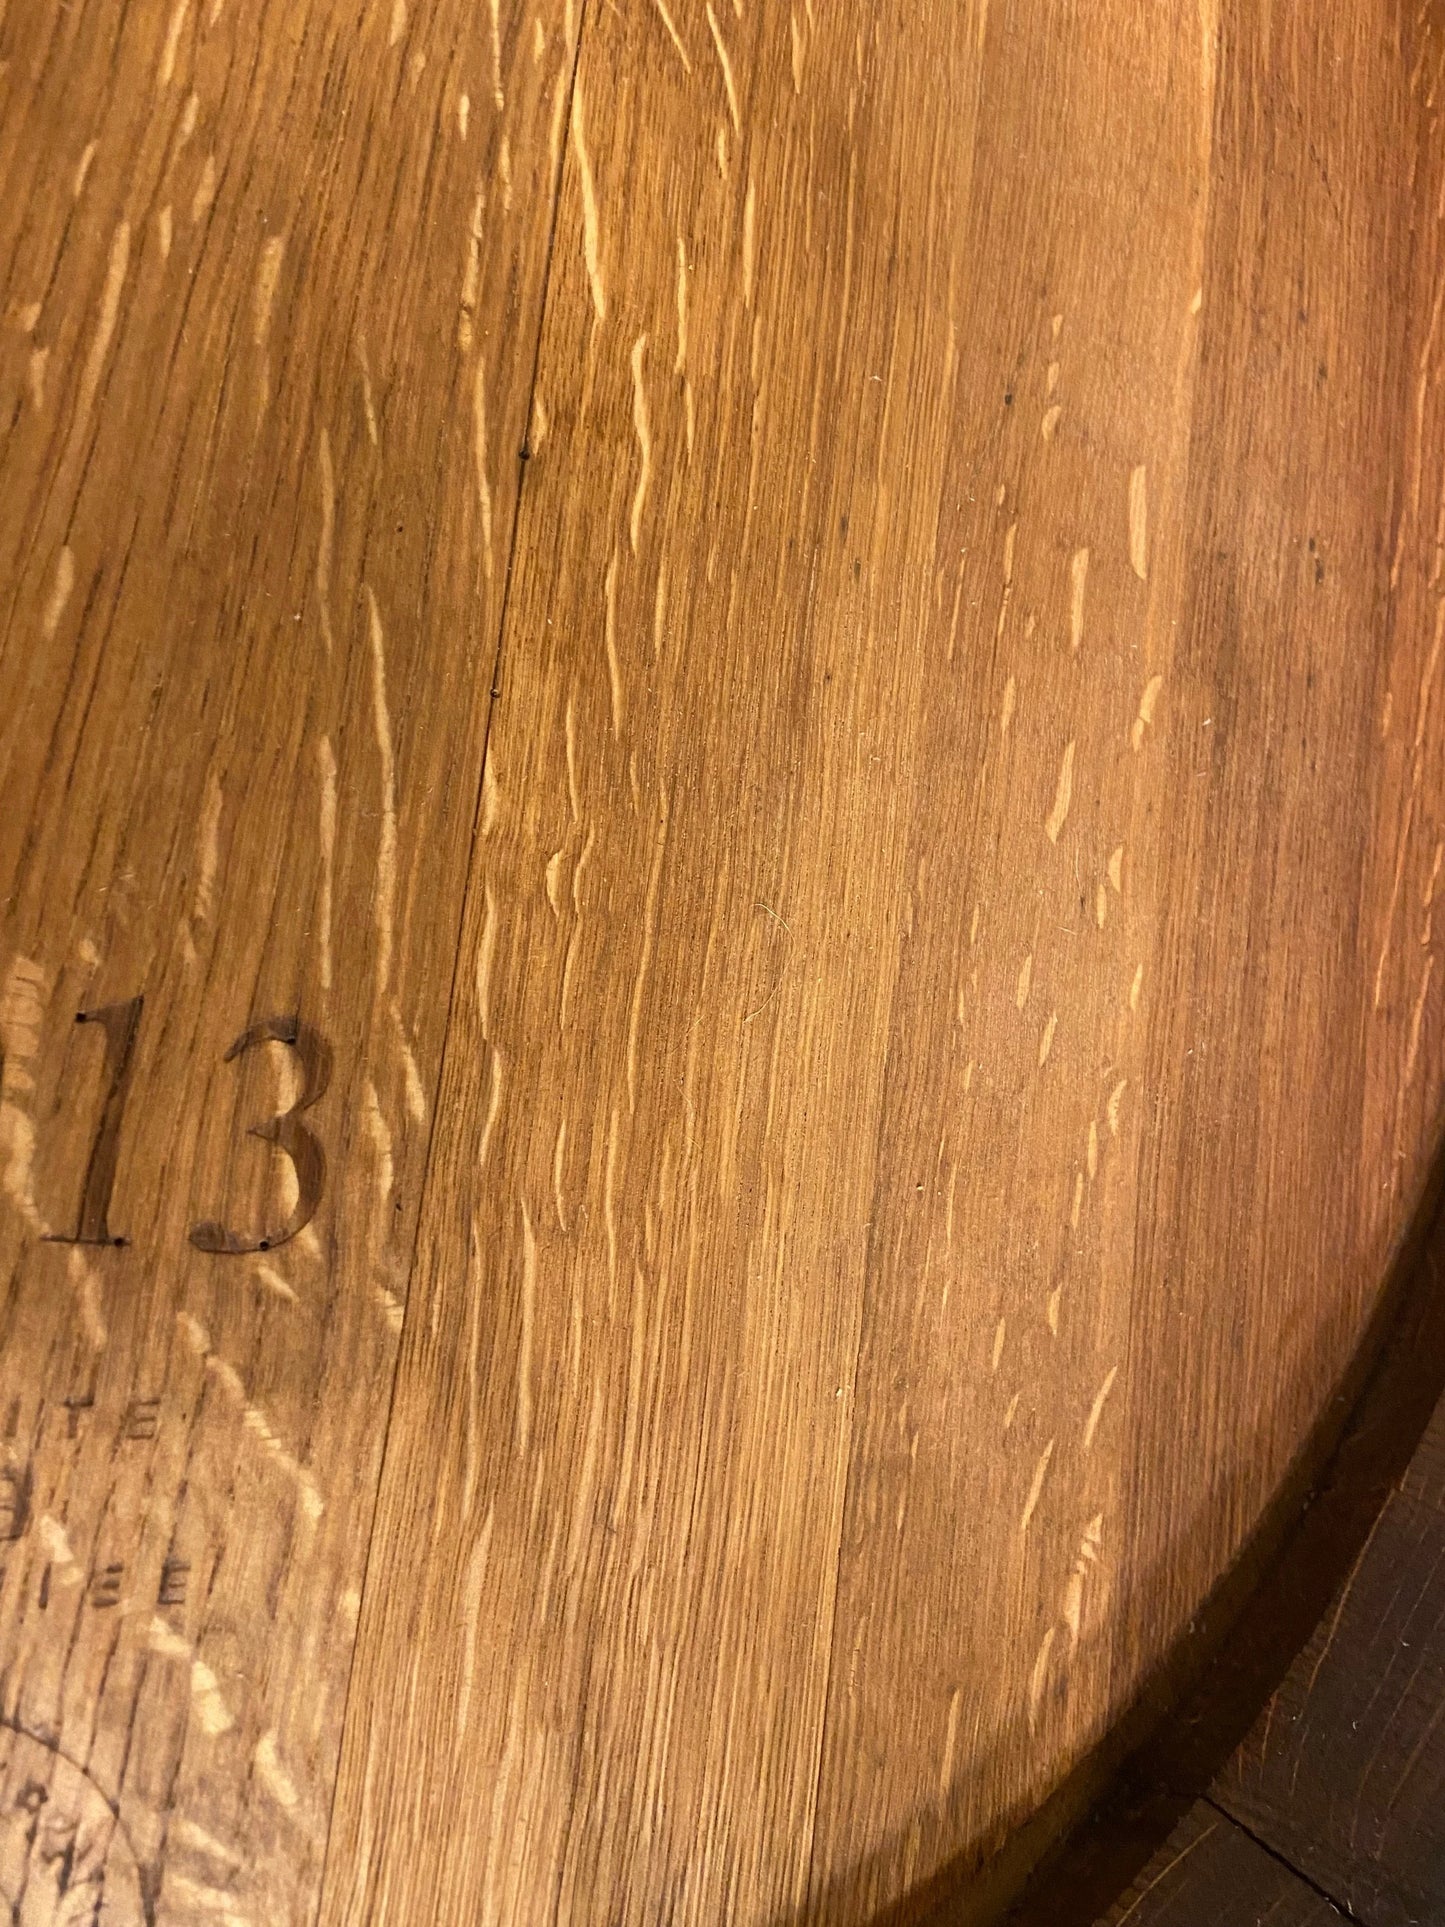 Food Safe linseed oil finish